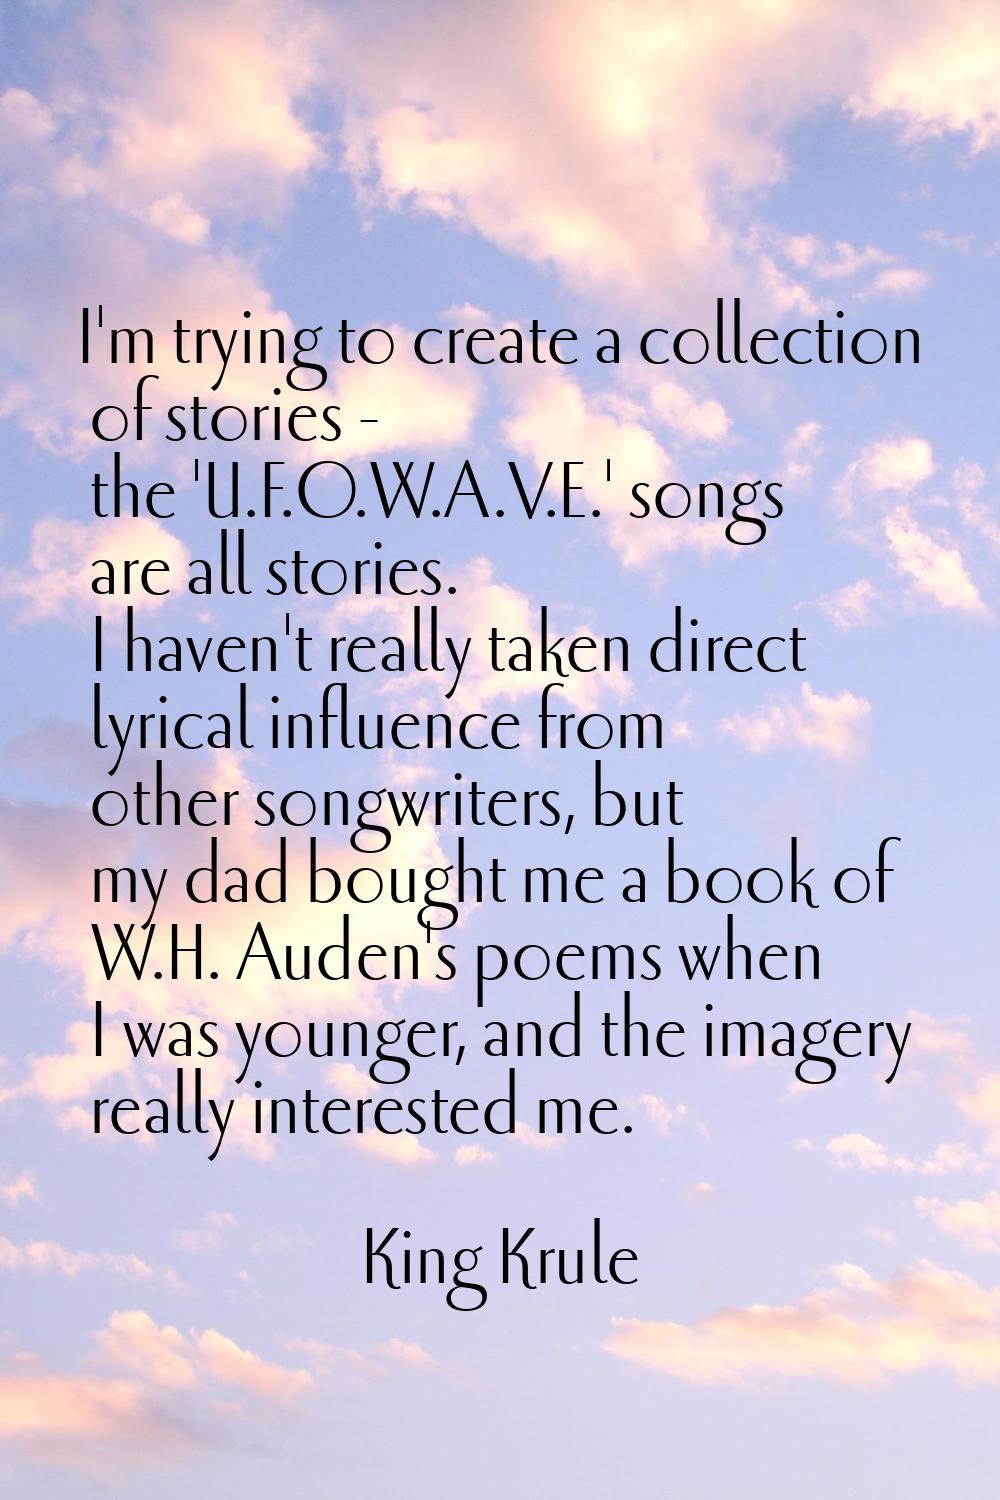 I'm trying to create a collection of stories - the 'U.F.O.W.A.V.E.' songs are all stories. I haven'